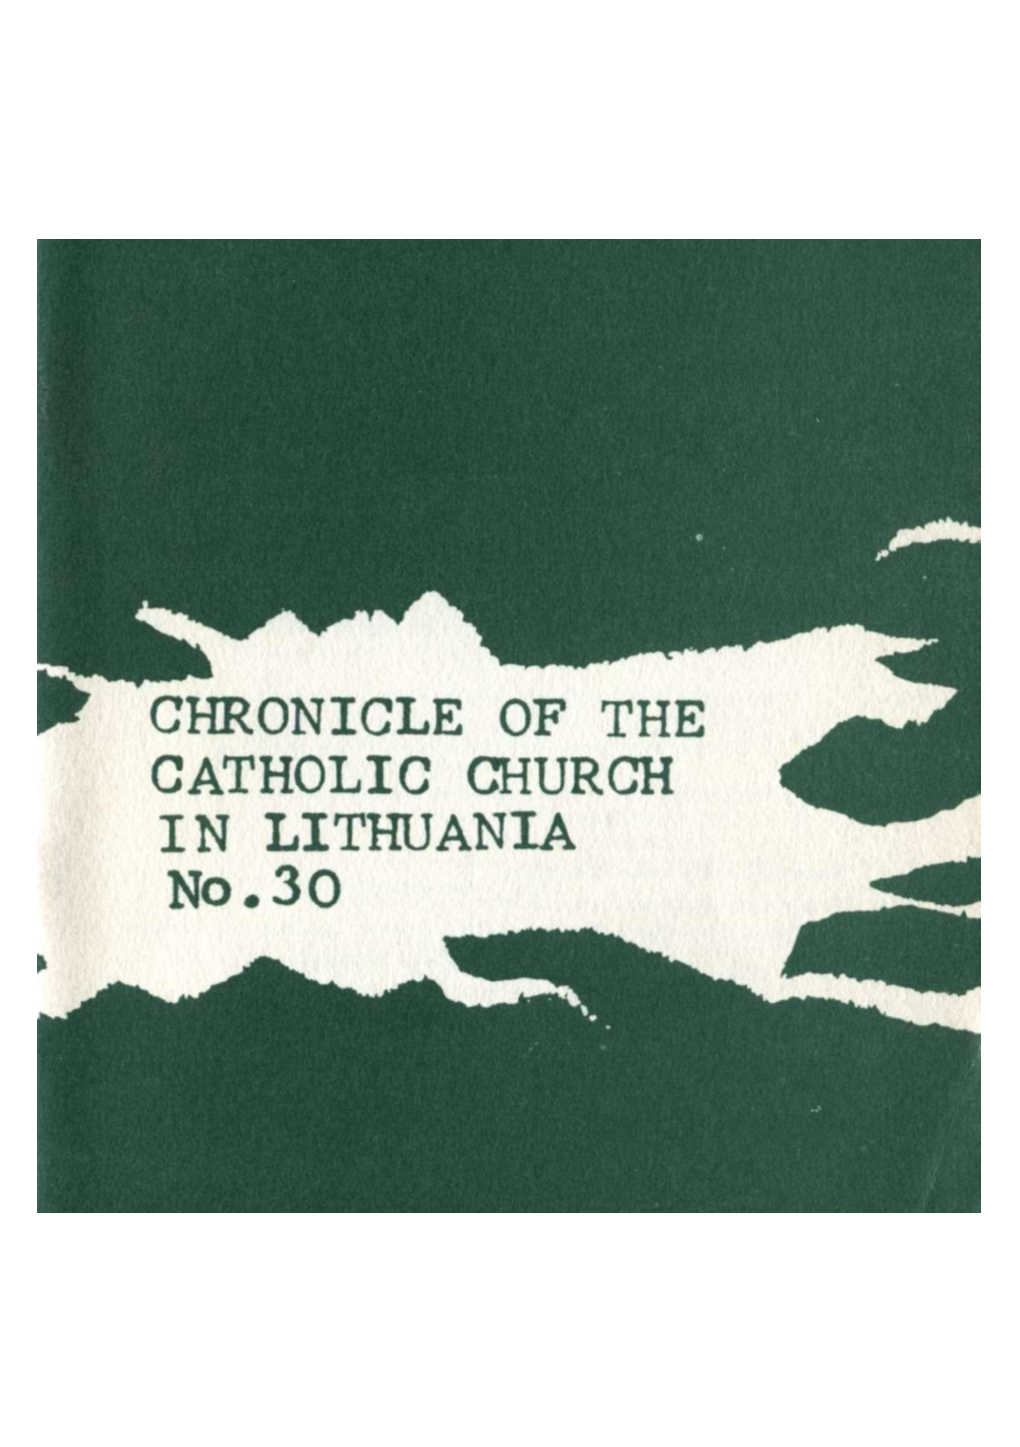 The CHRONICLE of the CATHOLIC CHURCH in LITHUANIA NO. 30